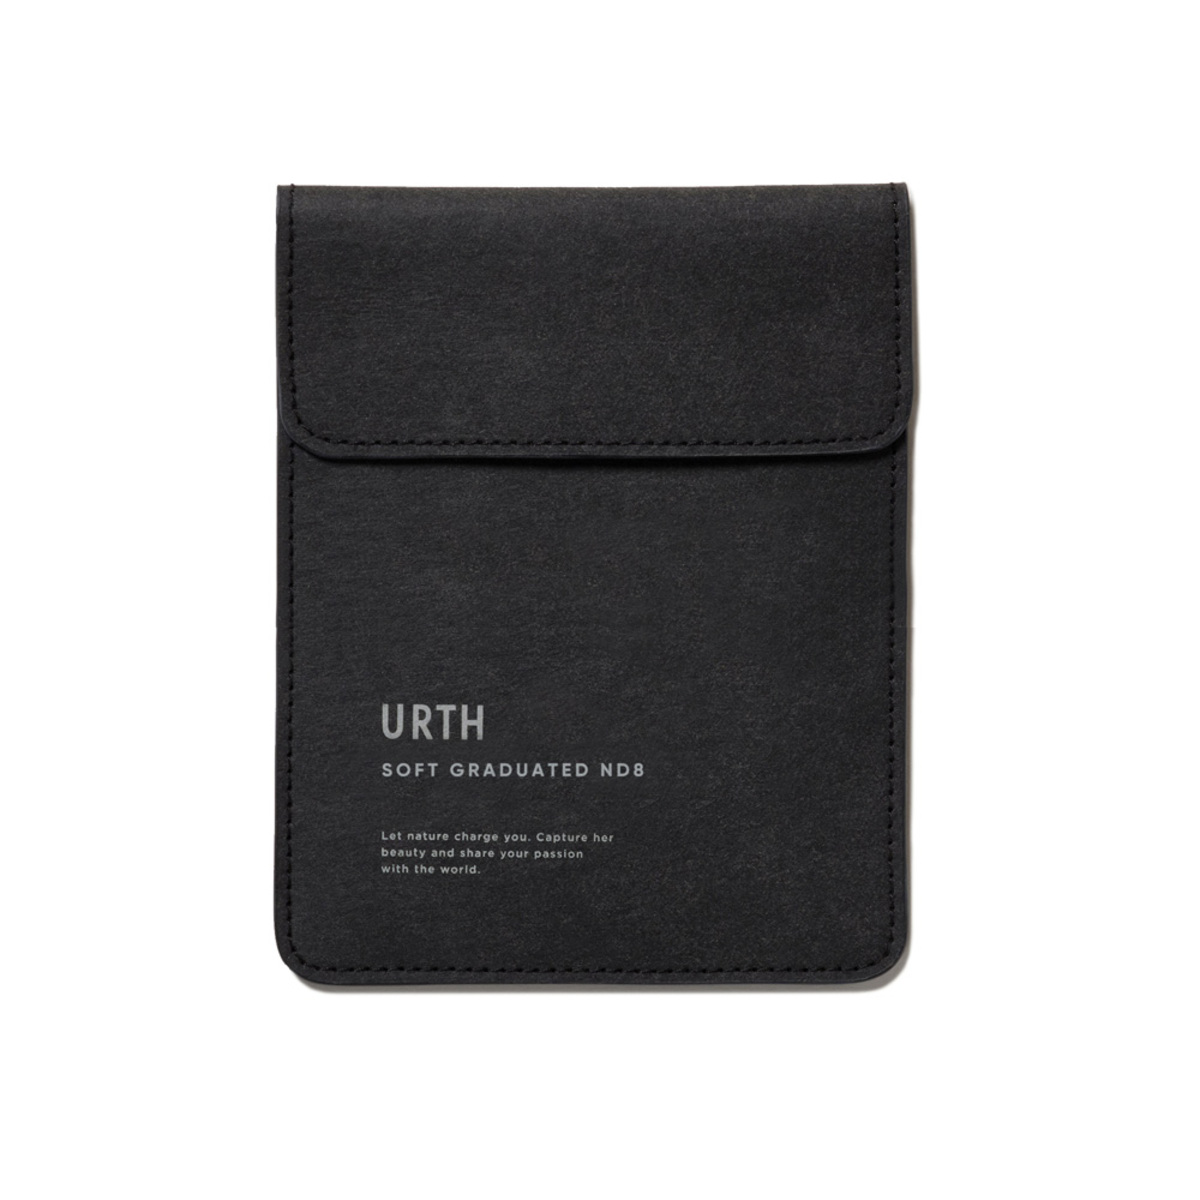 Urth 100 x 150mm Soft Graduated ND8 (3 Stop) Filter (Plus+)